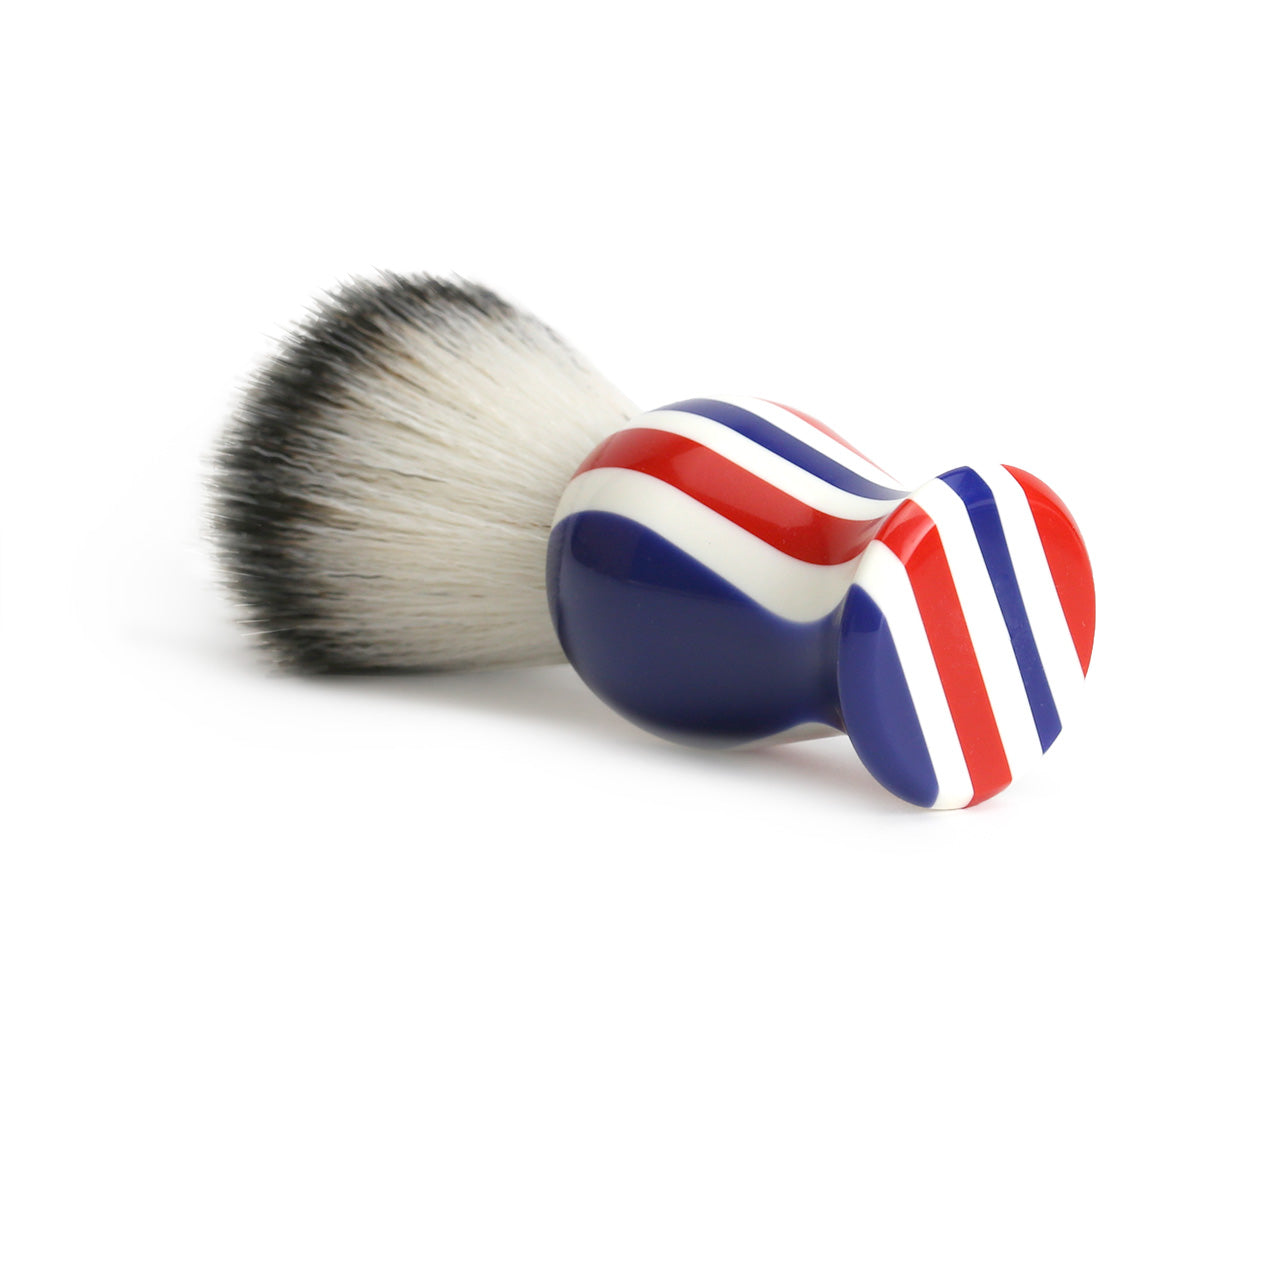 The Stray Whisker synthetic shave brush, red white and blue striped handle